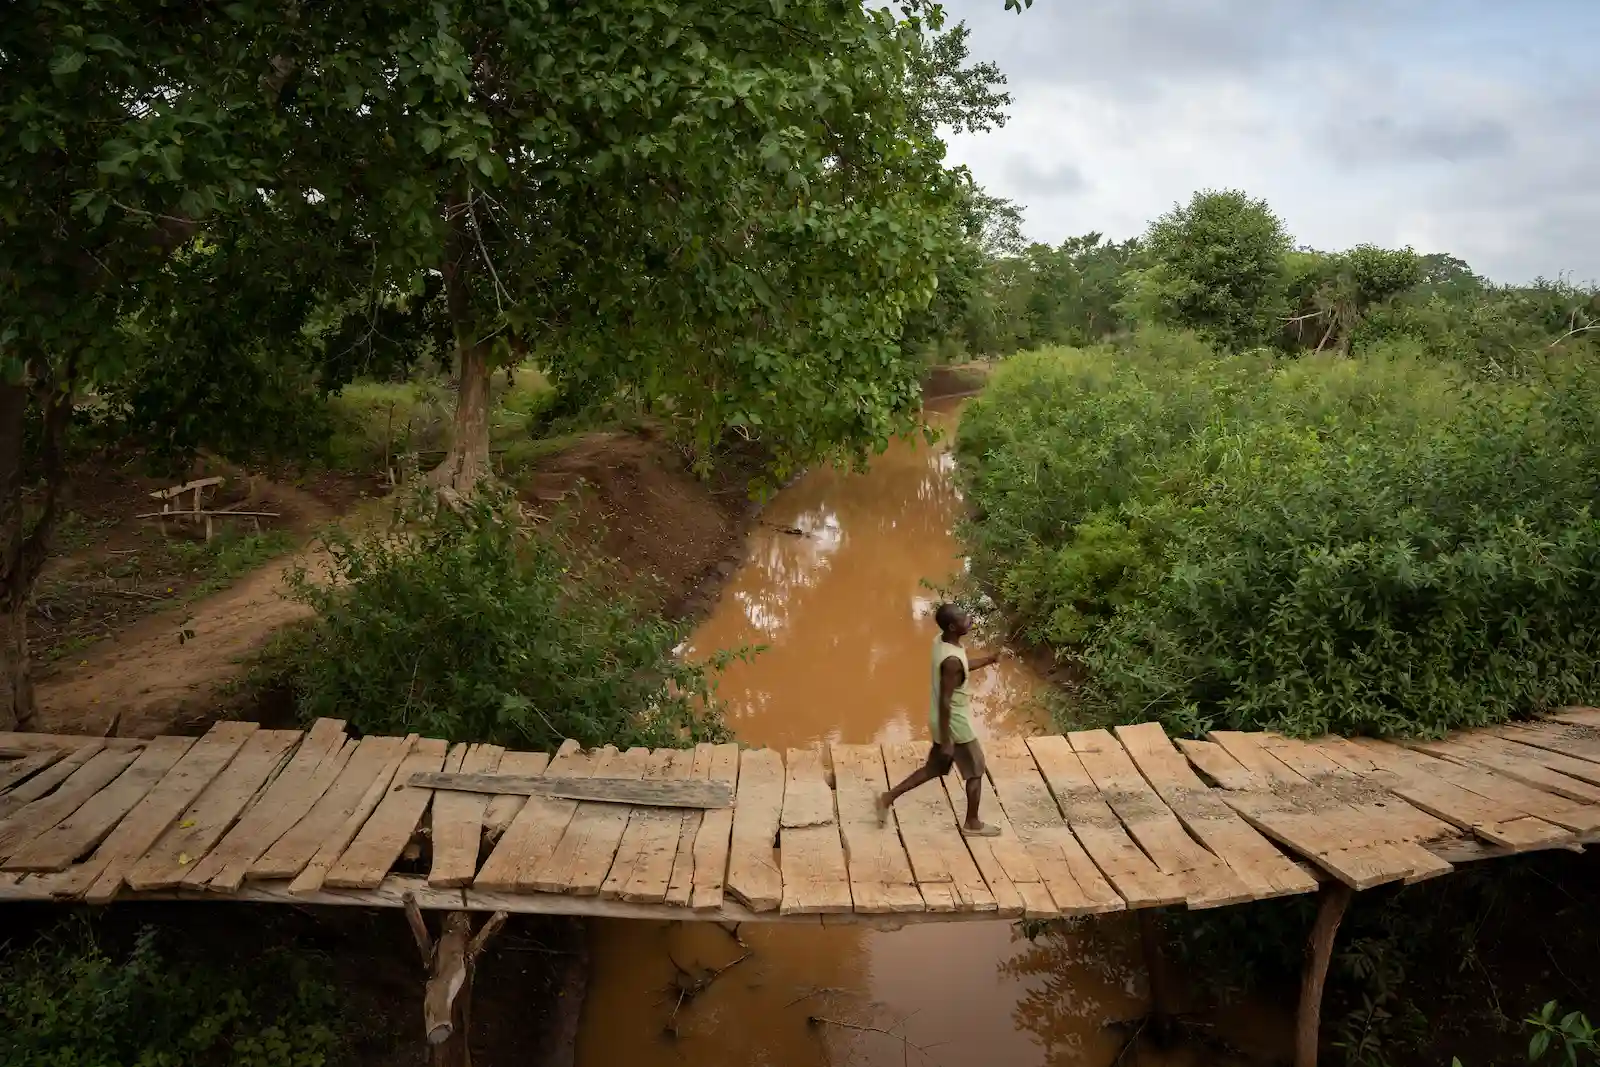 A man uses a small bridge to cross a river in Kenya